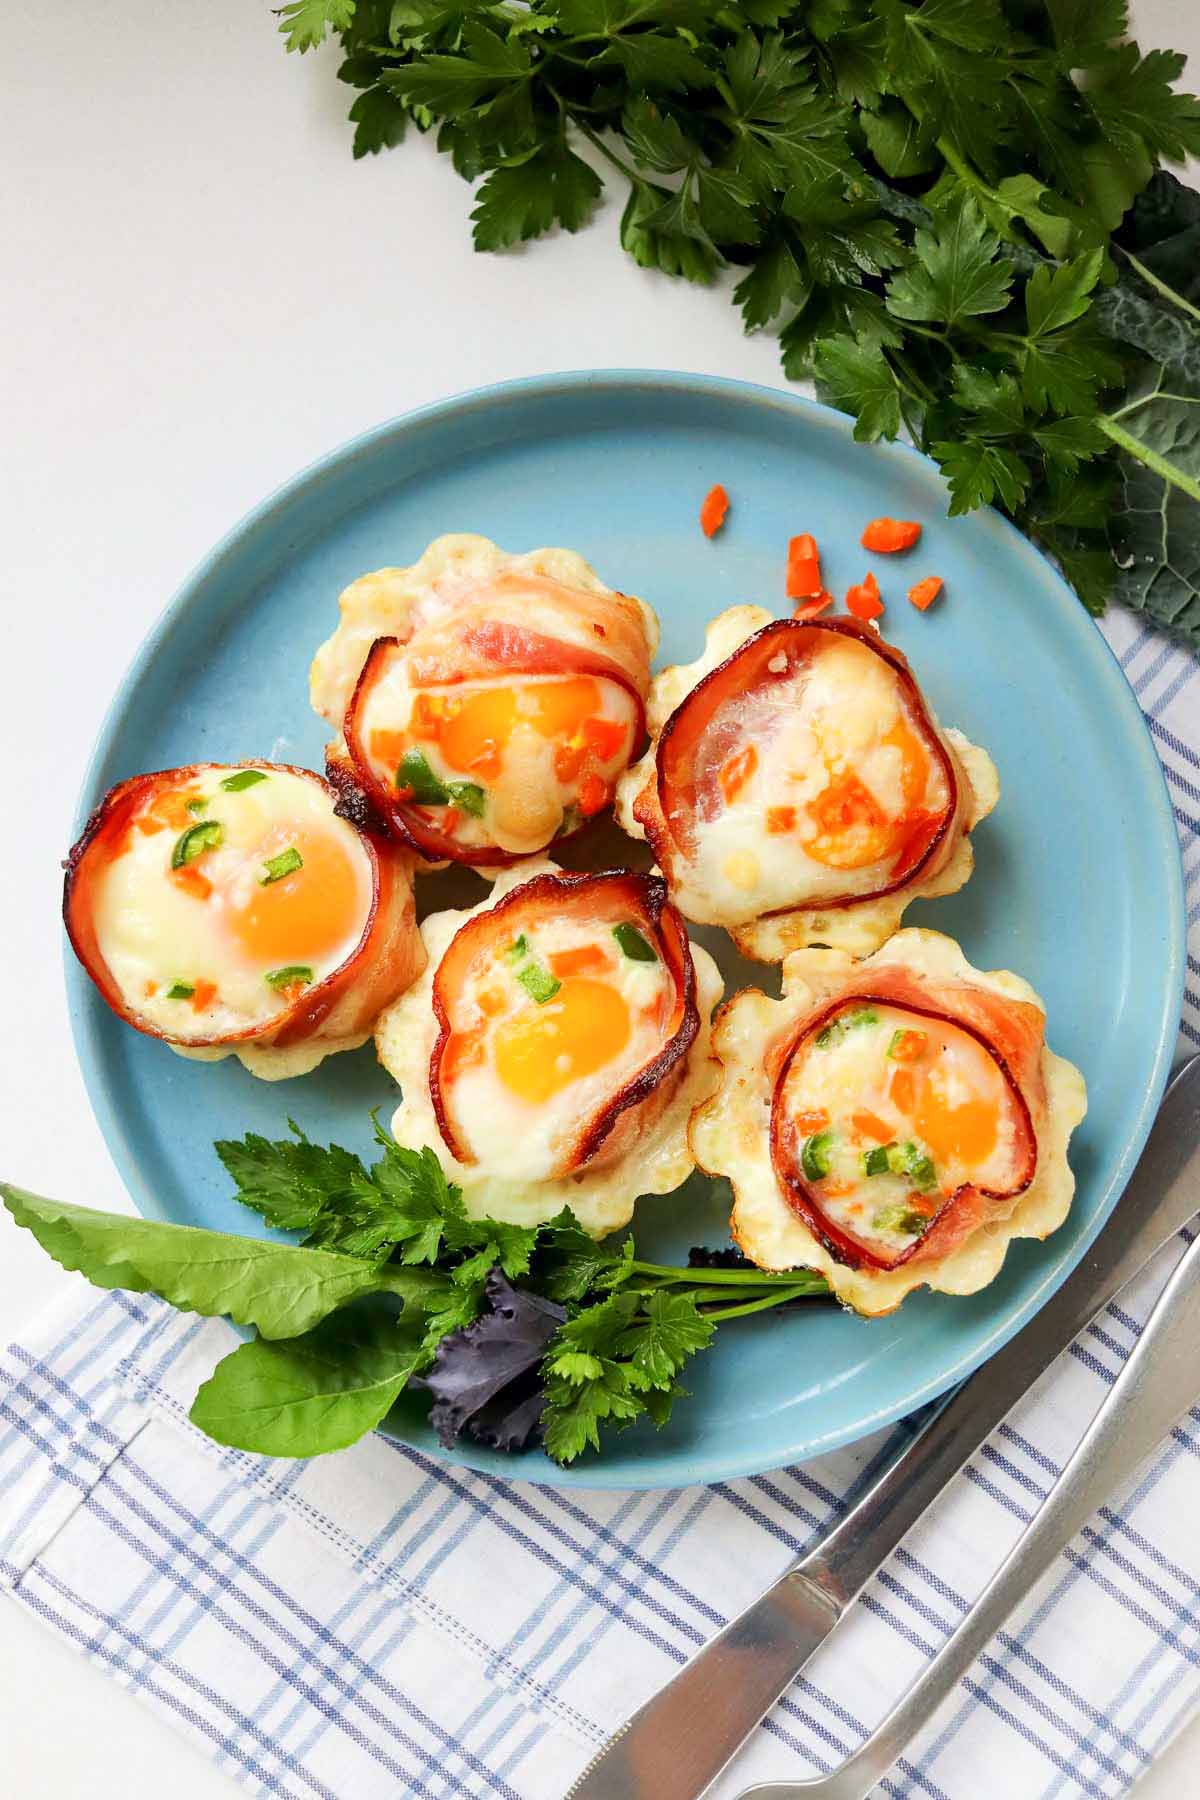 Air Fryer Bacon and Egg Bite Cups (Keto and Low-Carb) + {VIDEO}